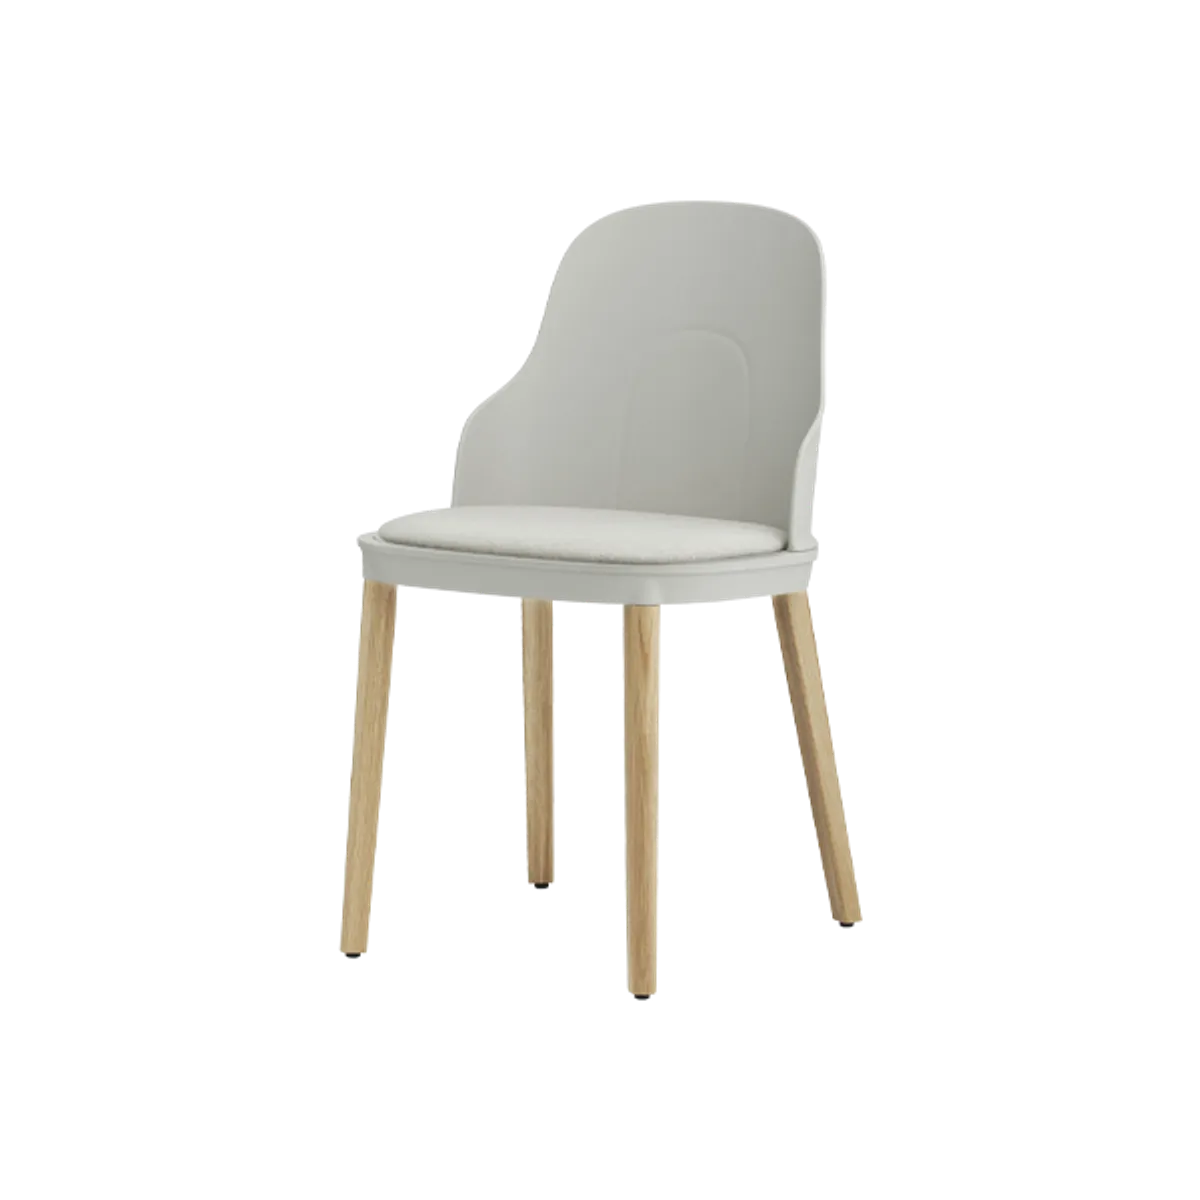 Bon soft wood chair Inside Out Contracts